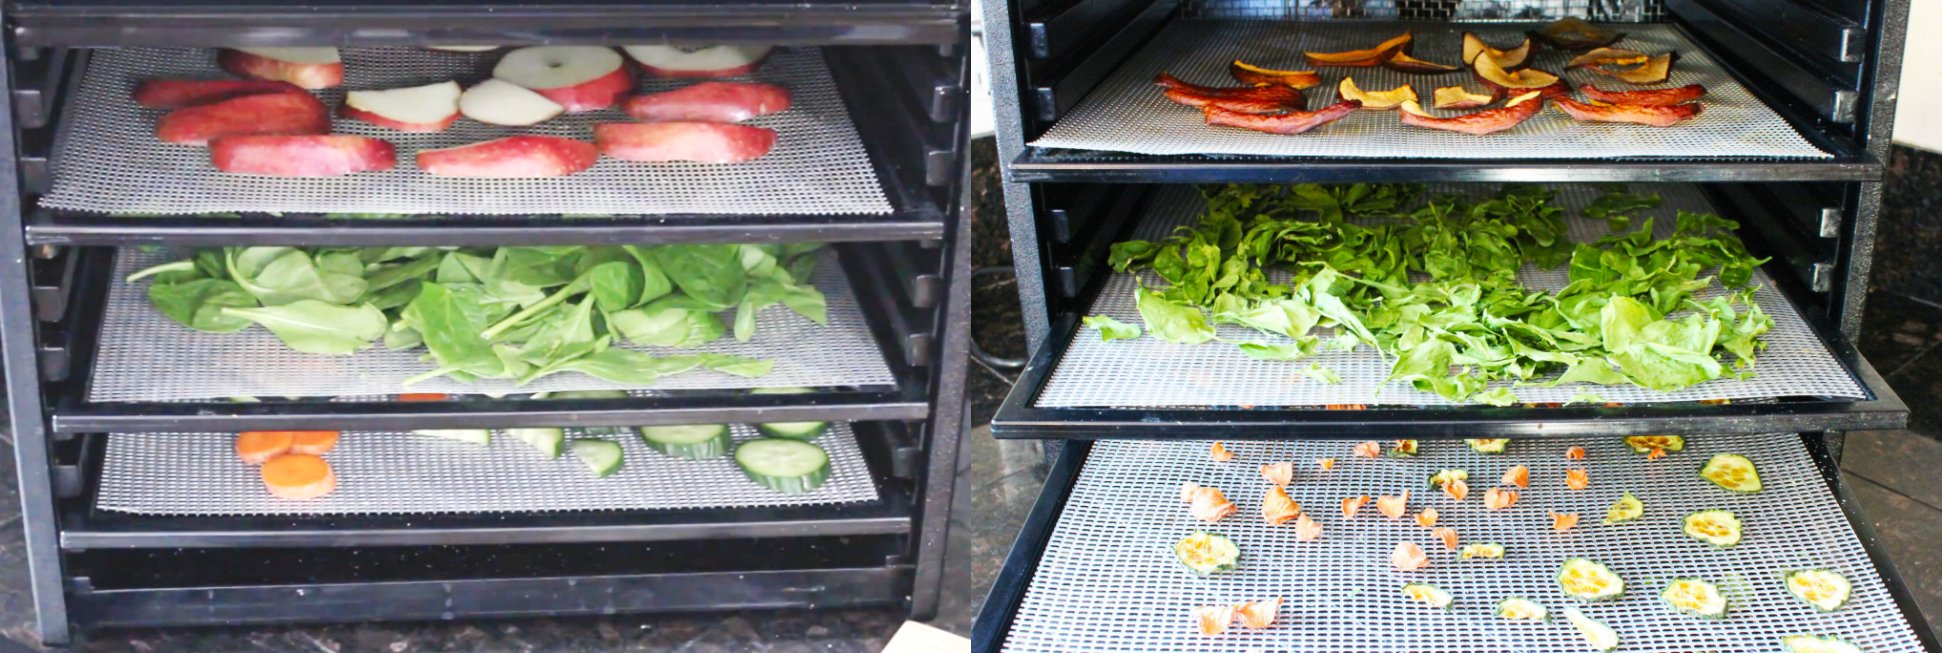 Use the Dehydrator to Prevent Food Waste